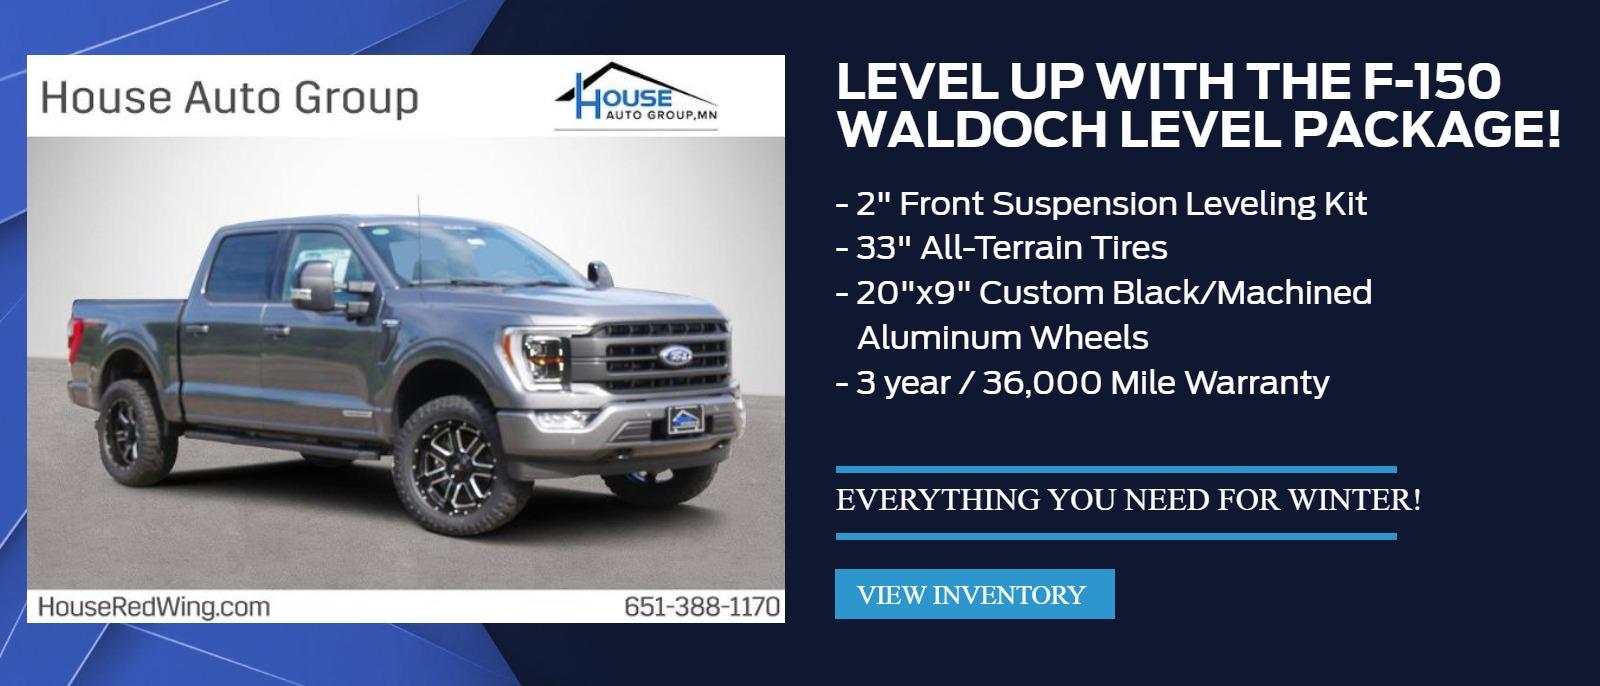 LEVEL UP With the f-150 WALDOCH Level Package!
o	2" Front Suspension Leveling Kit
o	33" All-Terrain Tires
o	20"x9" Custom Black/Machined Aluminum Wheels
o	3 year / 36,000 Mile Warranty